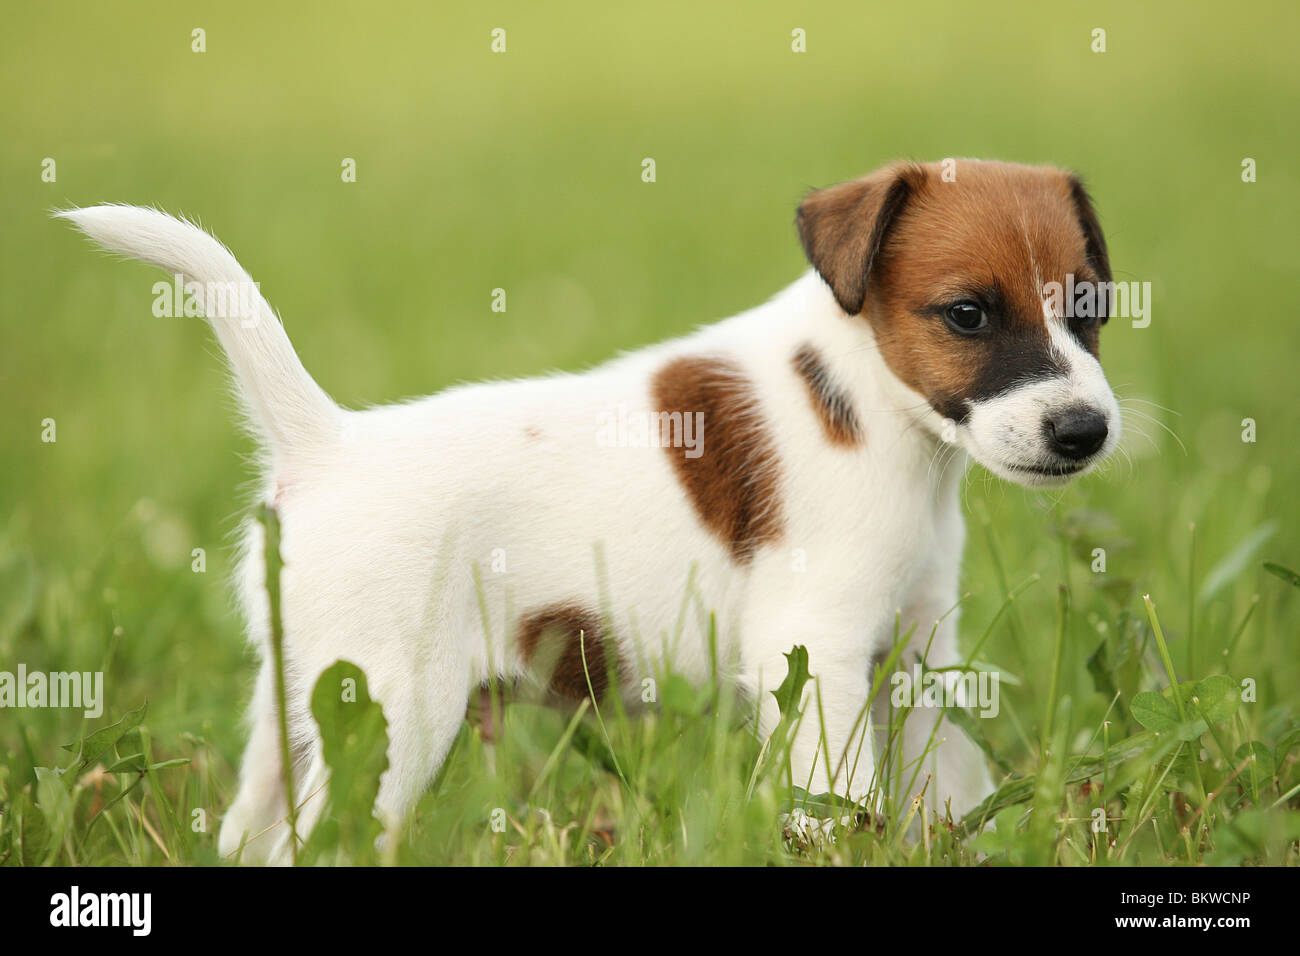 Smooth Fox Terrier dog puppy standing meadow Stock Photo - Alamy